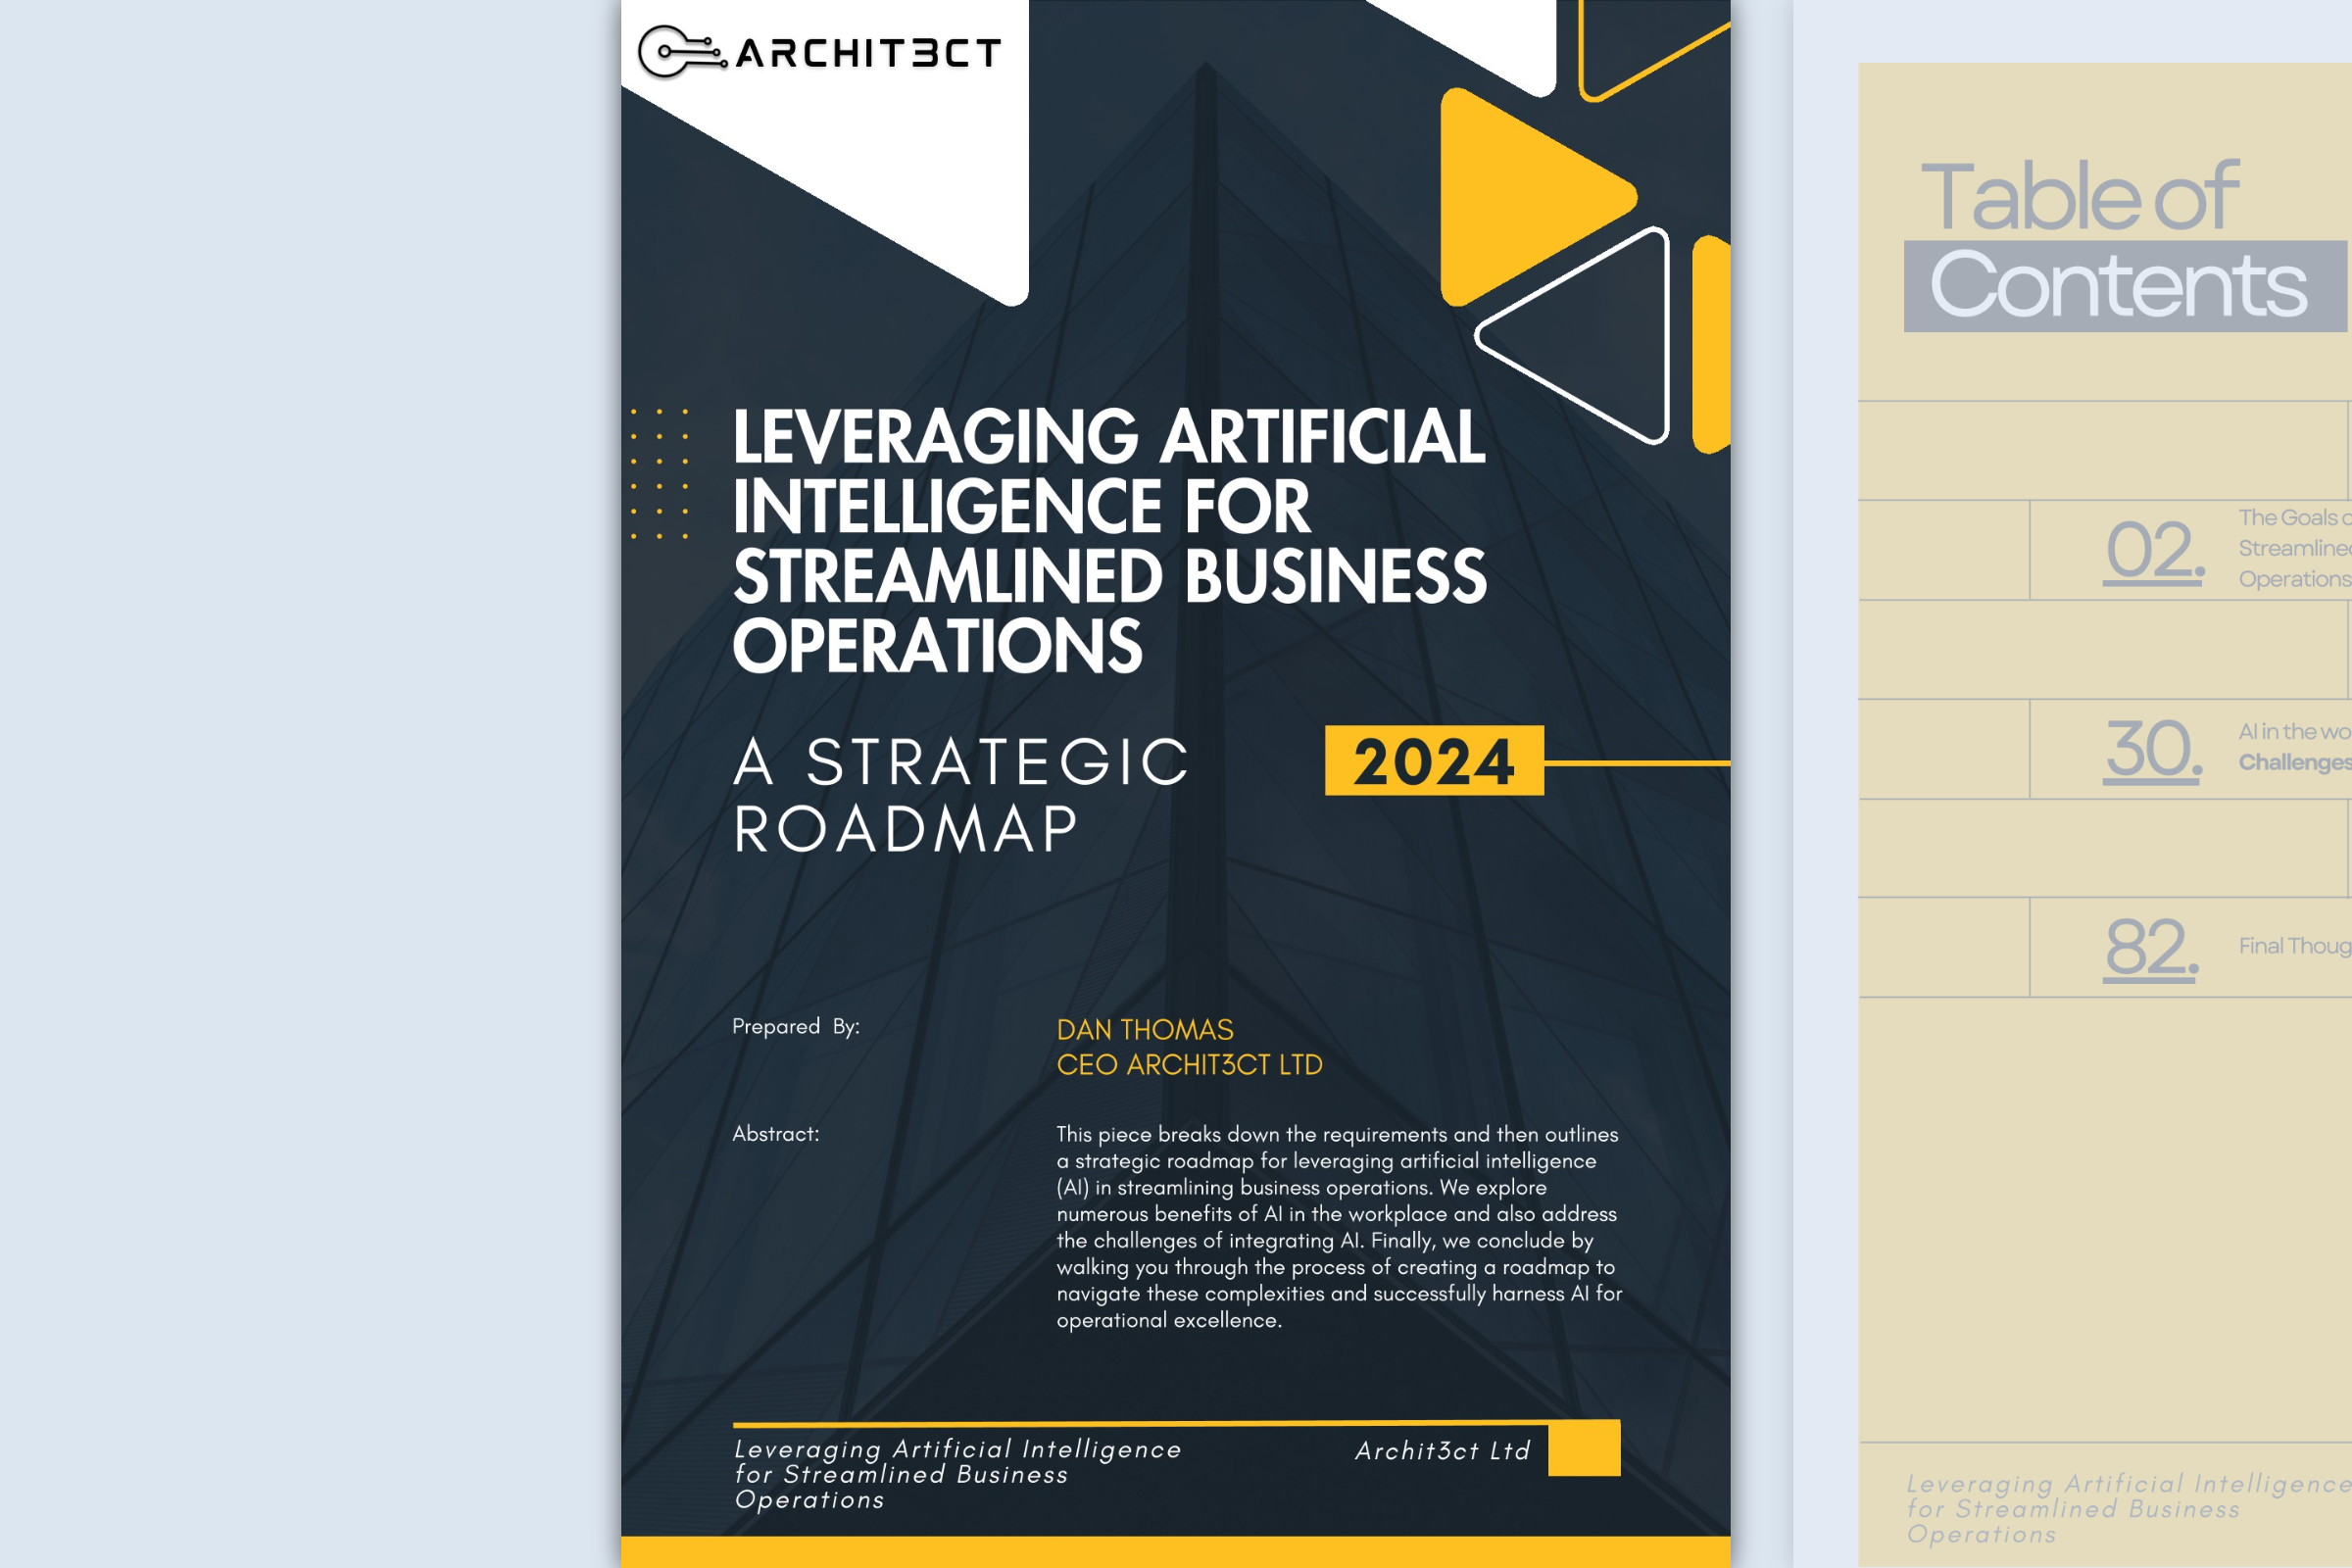 Leveraging Artificial Intelligence for Streamlined Business Operations: A Strategic Roadmap